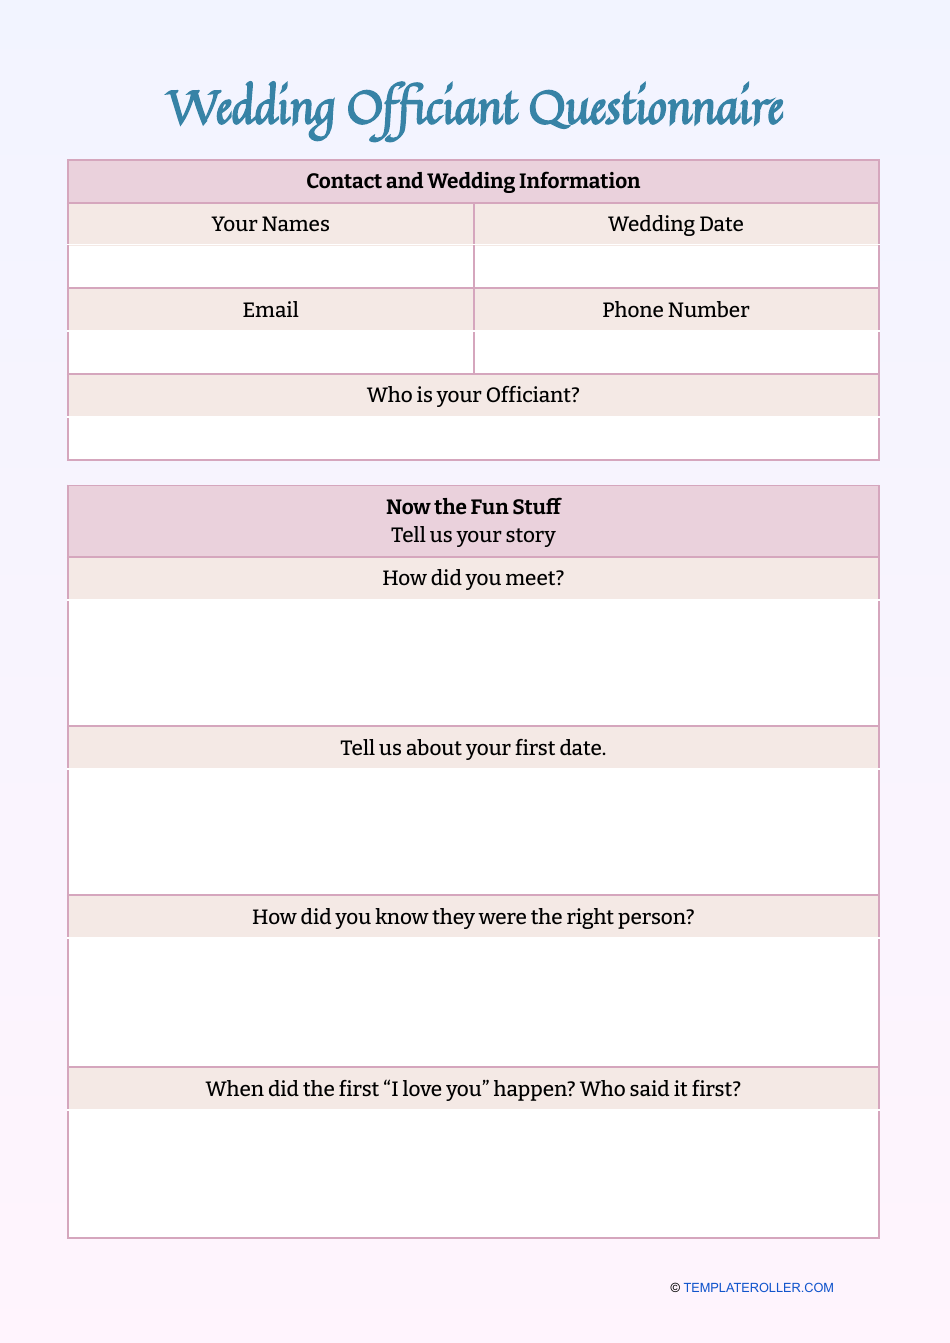 Wedding Officiant Questionnaire Template - Image Preview